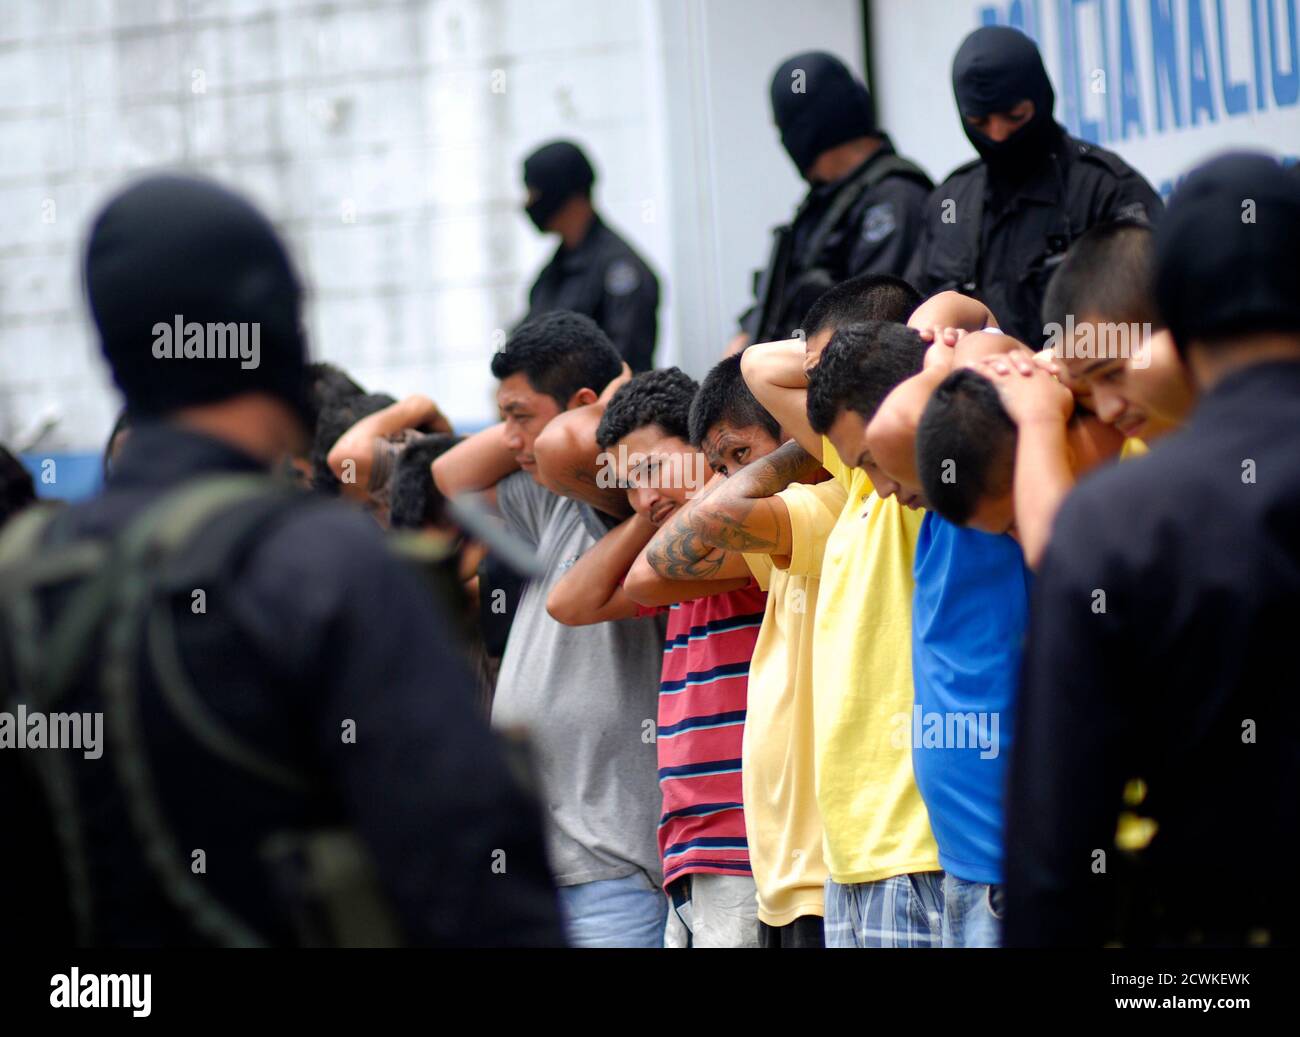 Policemen escort gang members of Mara Salvatrucha (MS13), who were detained during a night raid, in Soyapango, on the outskirts of El Salvador June 21, 2012. At least 30 of the 160 gang members arrested during a raid late Wednesday were presented to the media by the National Civil Police (Policia Nacional Civil, PNC), local media reported. According to the government of El Salvador, since a truce was signed between MS13 and 18 gangs, daily crimes have dropped from 15 cases to five. REUTERS/Ulises Rodriguez (EL SALVADOR - Tags: CRIME LAW) Stock Photo